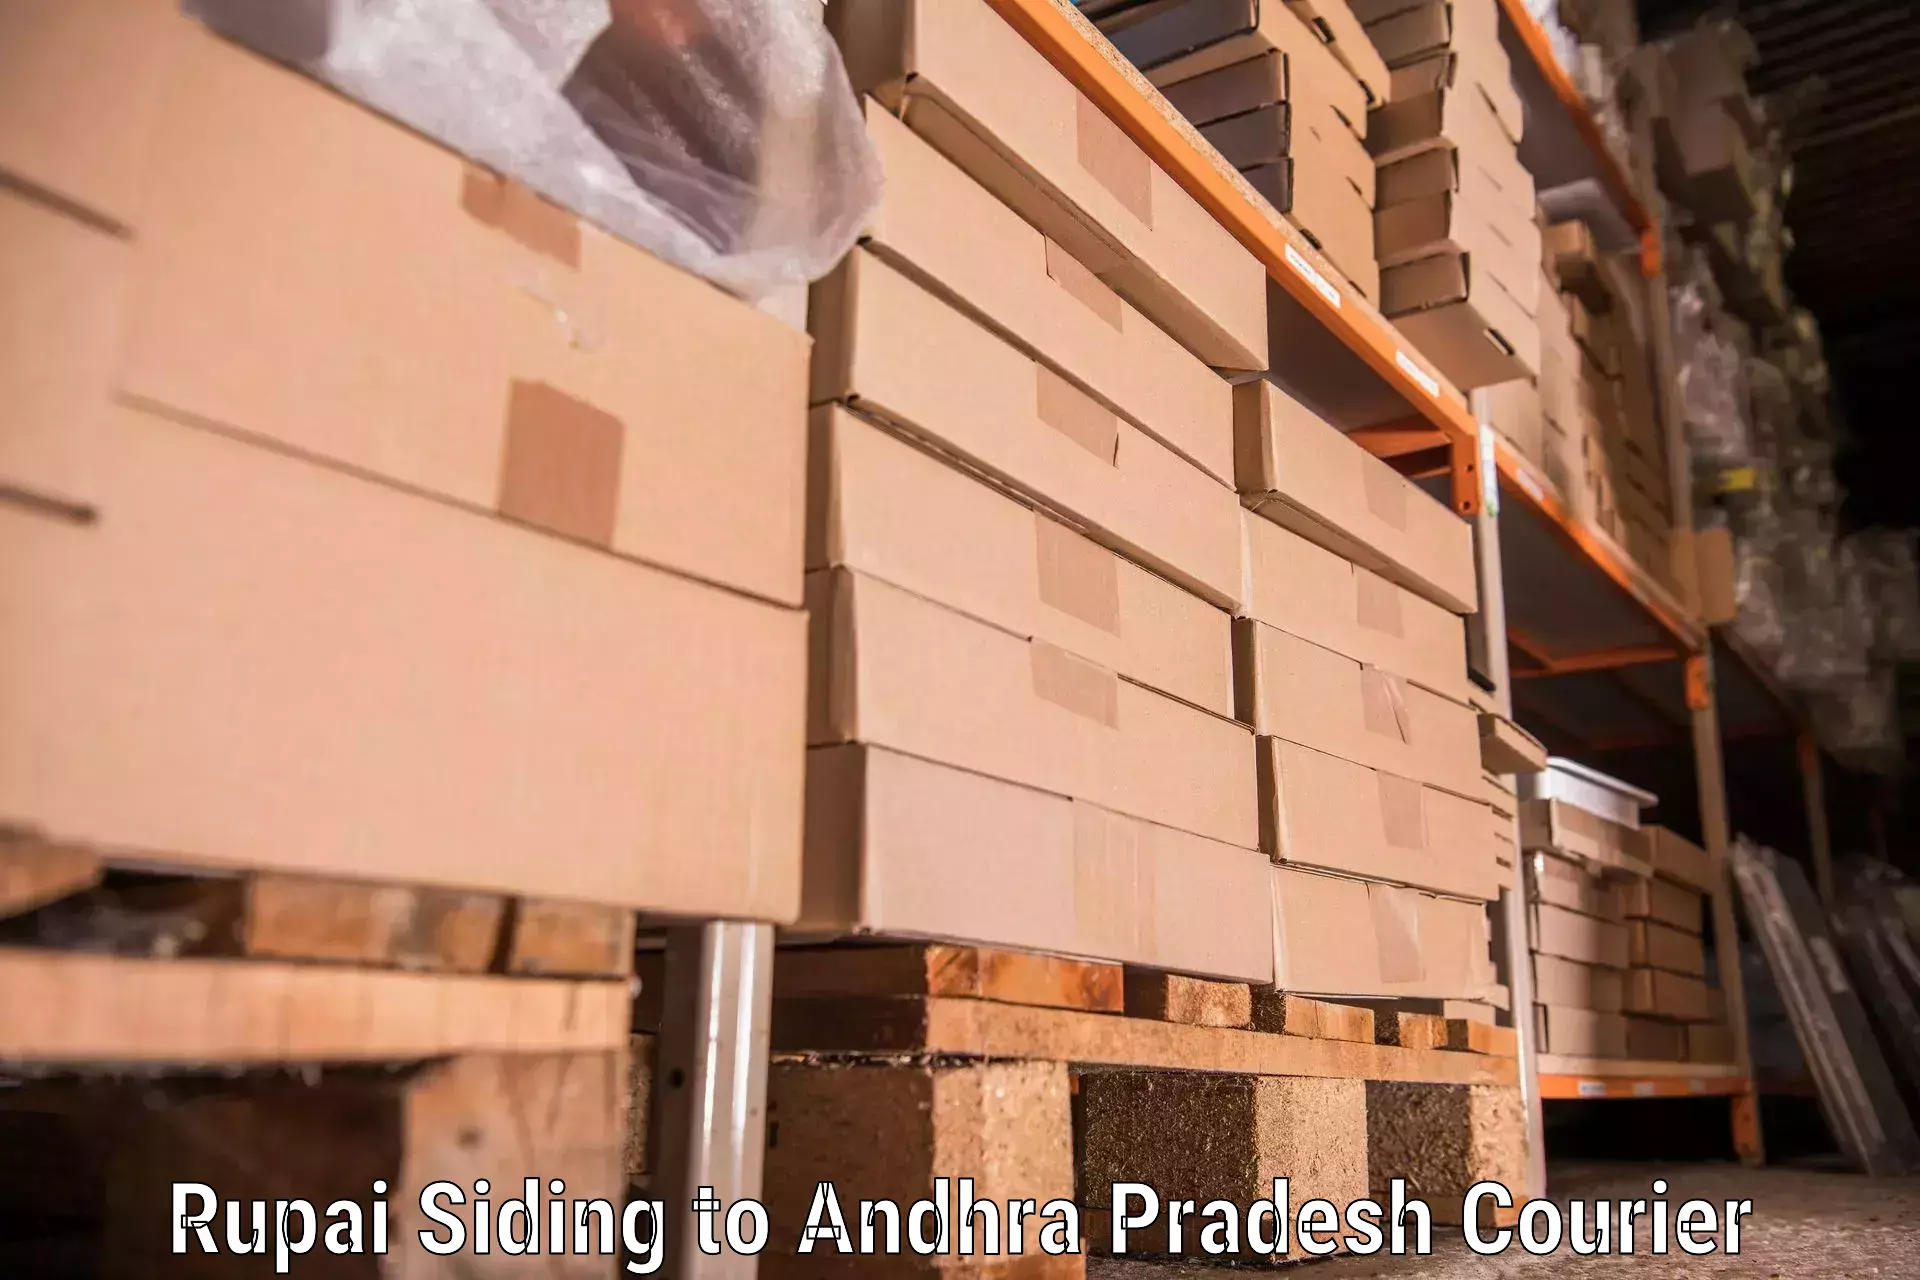 Expert packing and moving Rupai Siding to Visakhapatnam Port